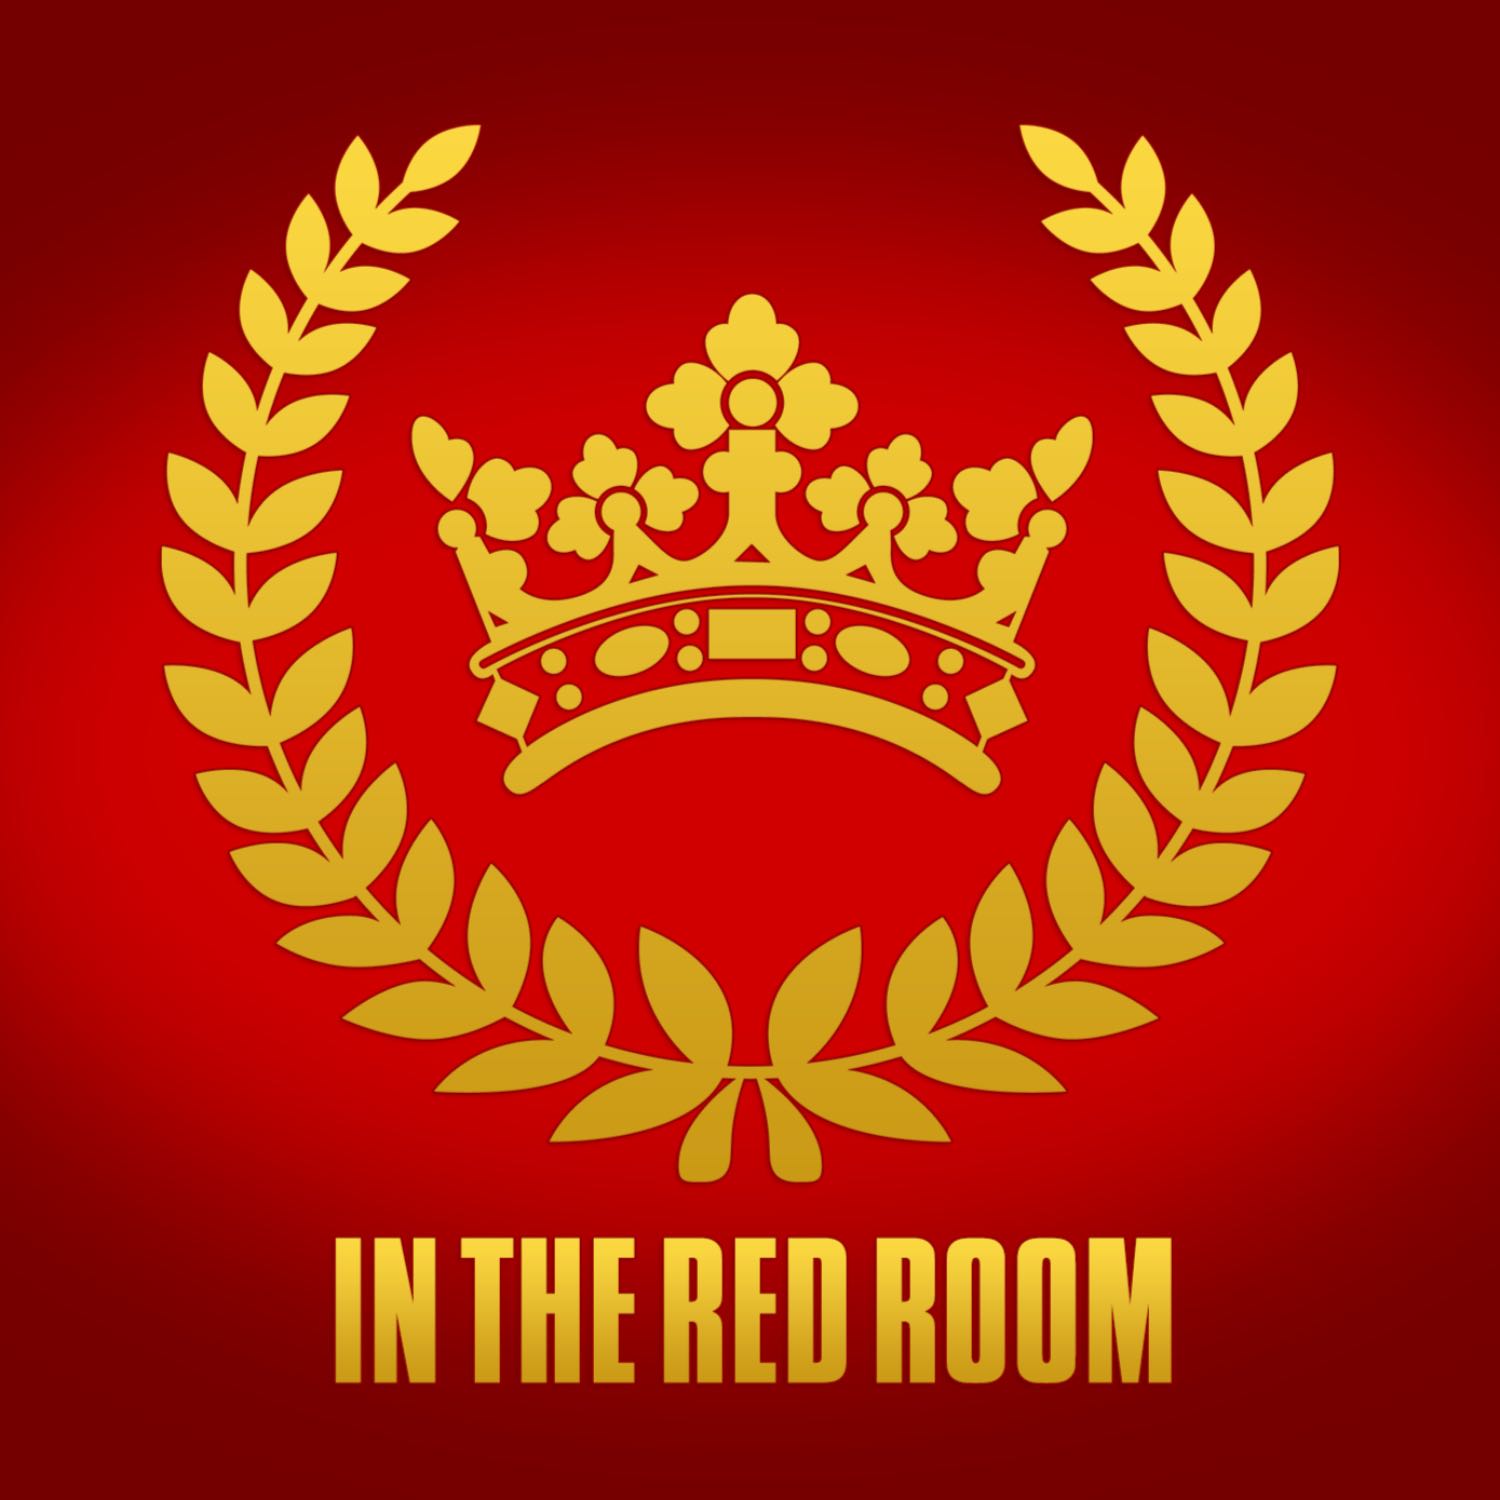 In the Red Room